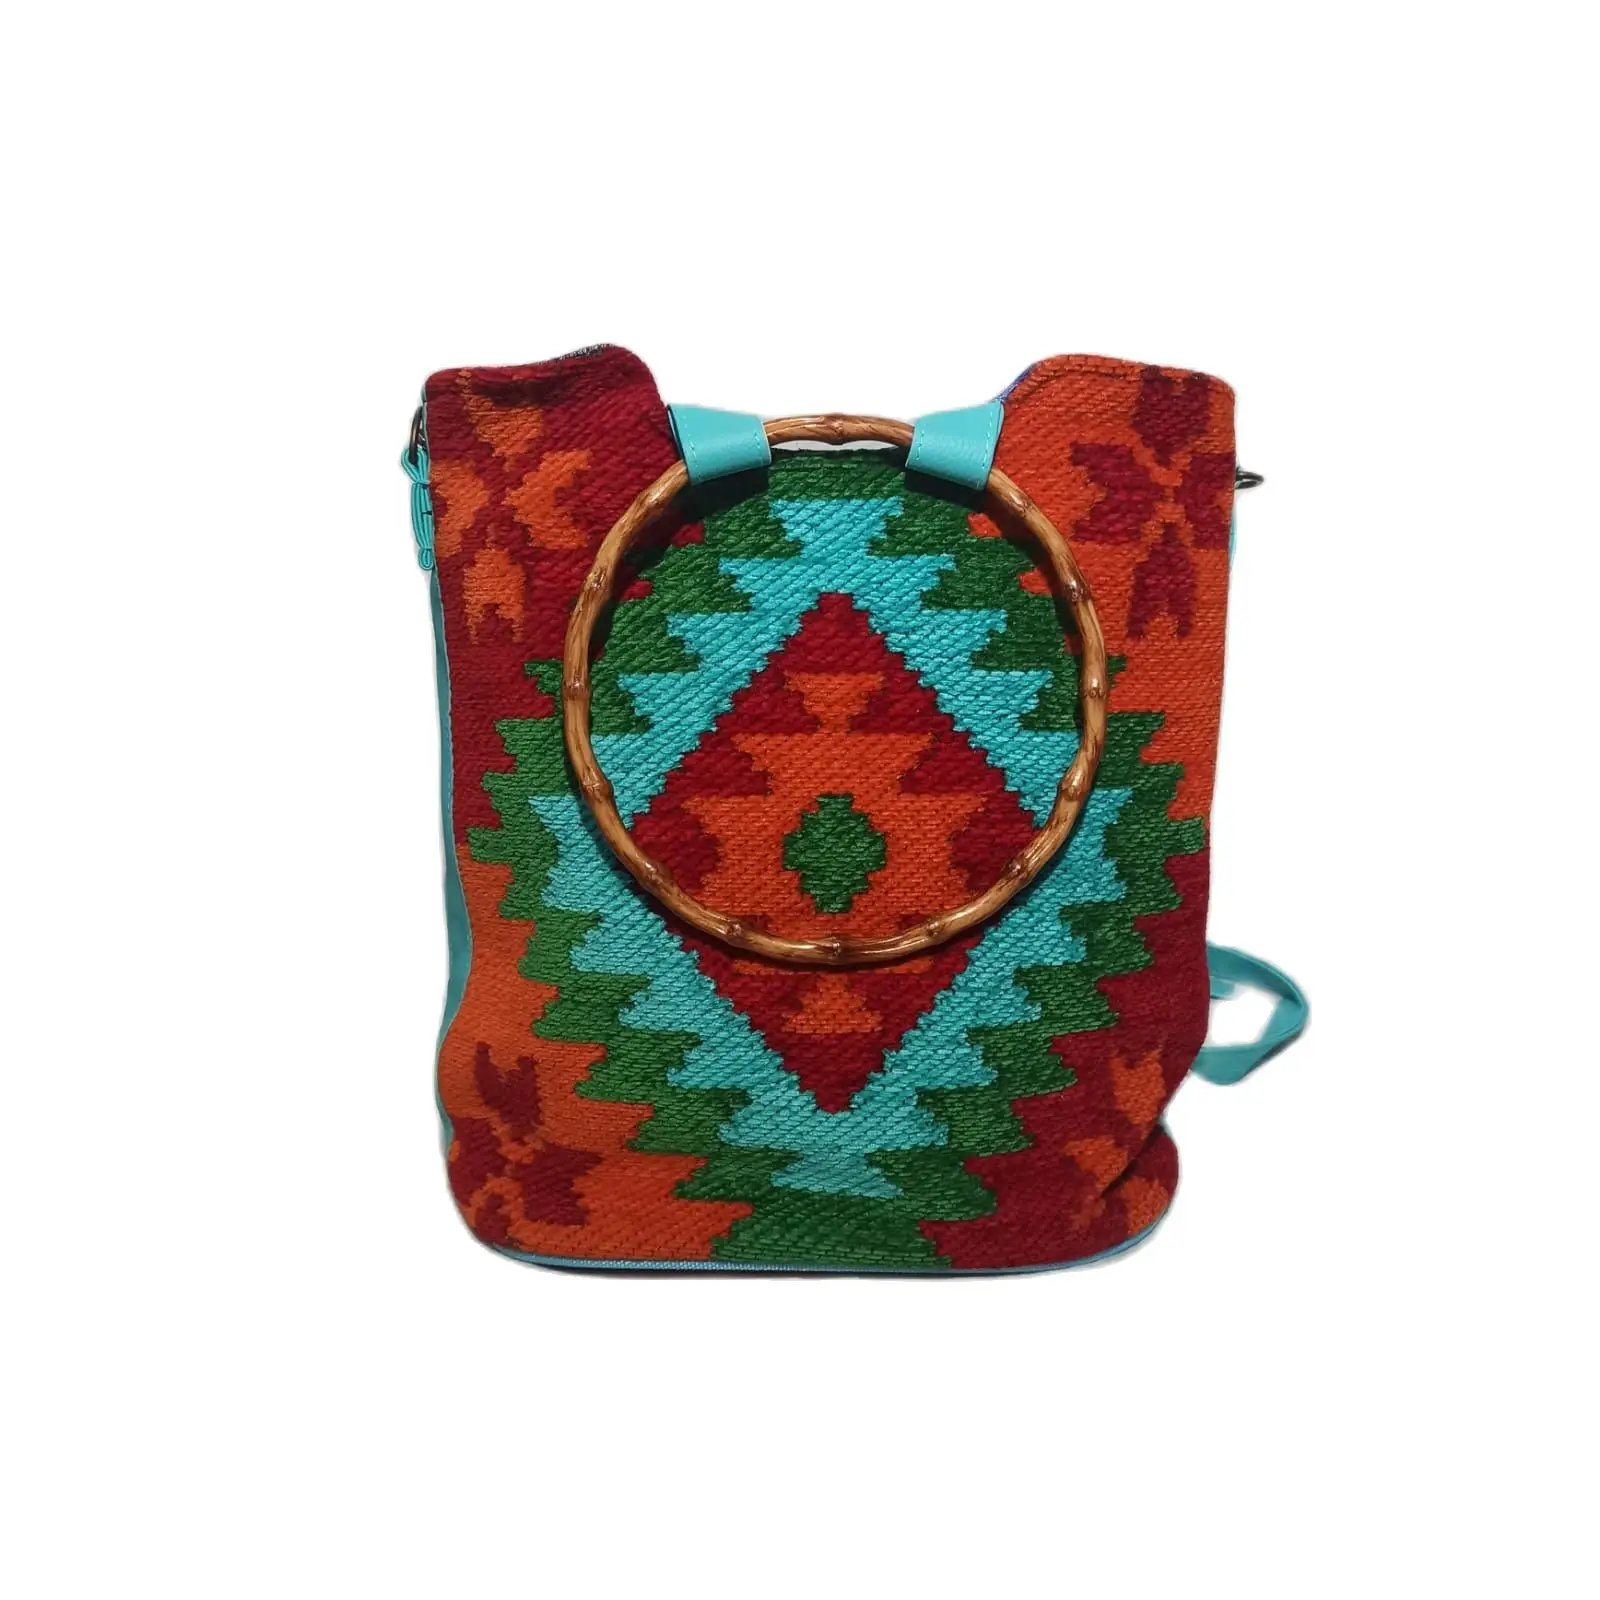 

Bone wooden bag. rugs and authentic patterns. red. orange. lilac blue. arm strap. don't hold hands leather strap. unique. limited production. great design. healthy yarn. very special craftsmanship. produced by root dye